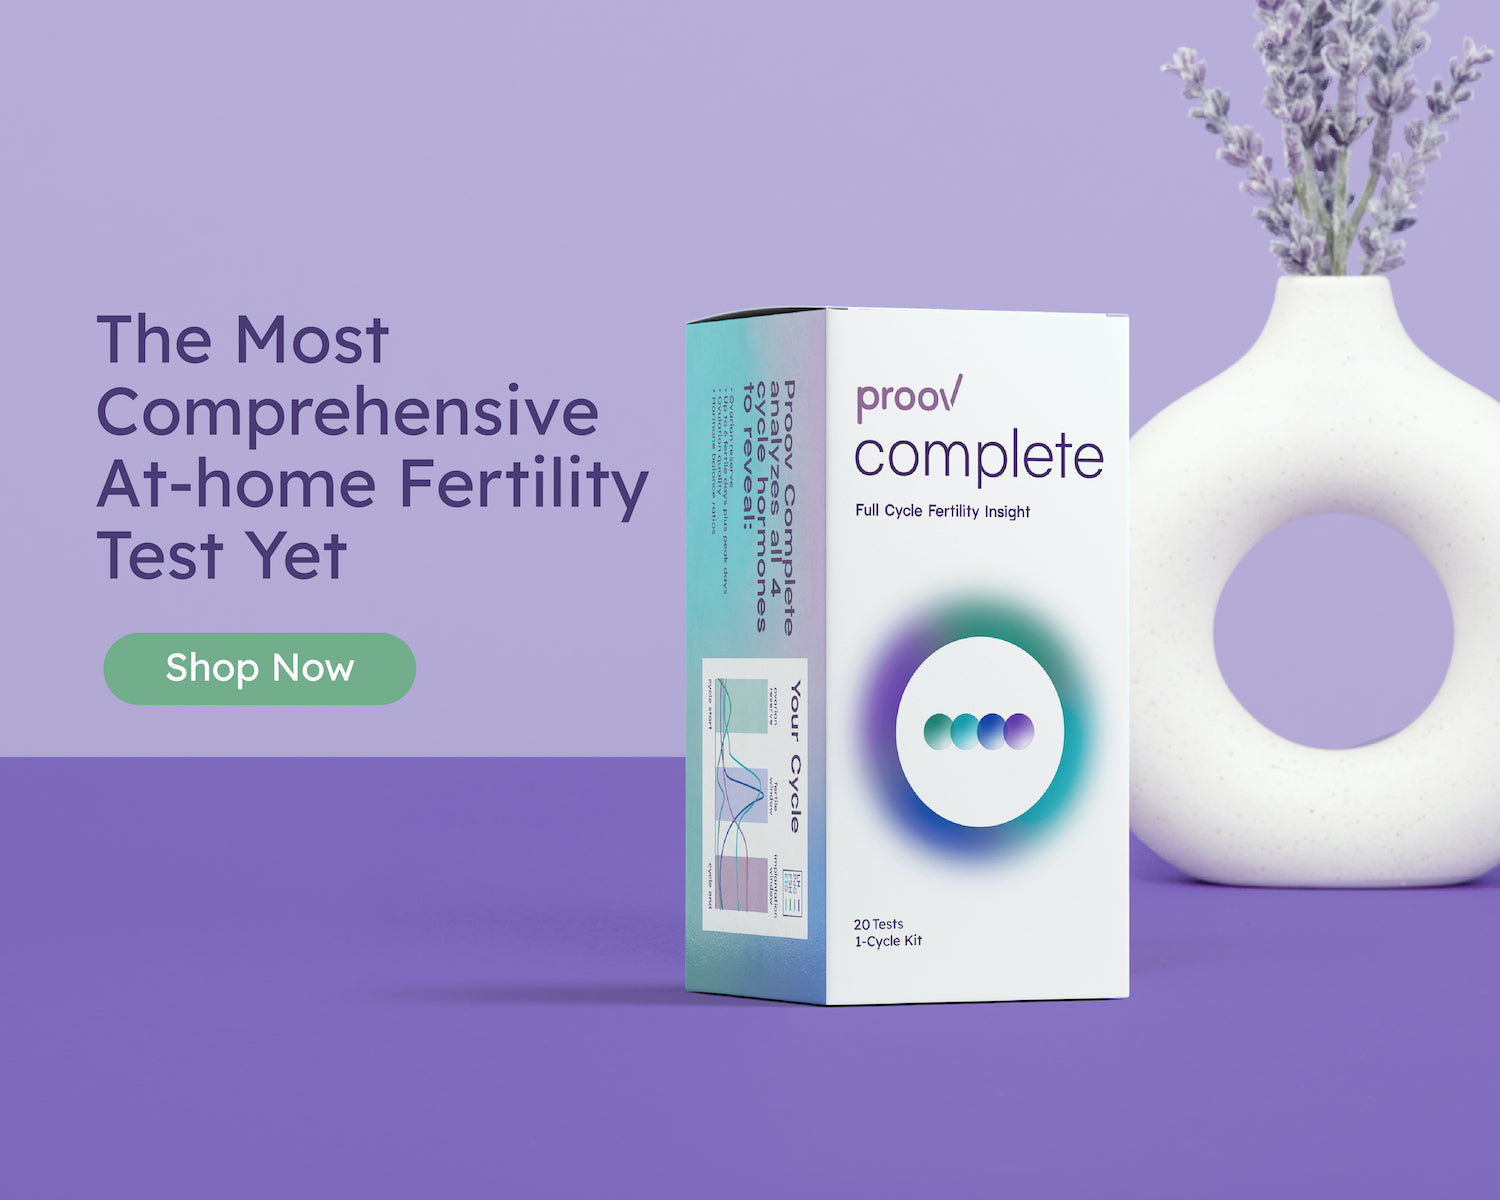 how accurate are at-home fertility tests